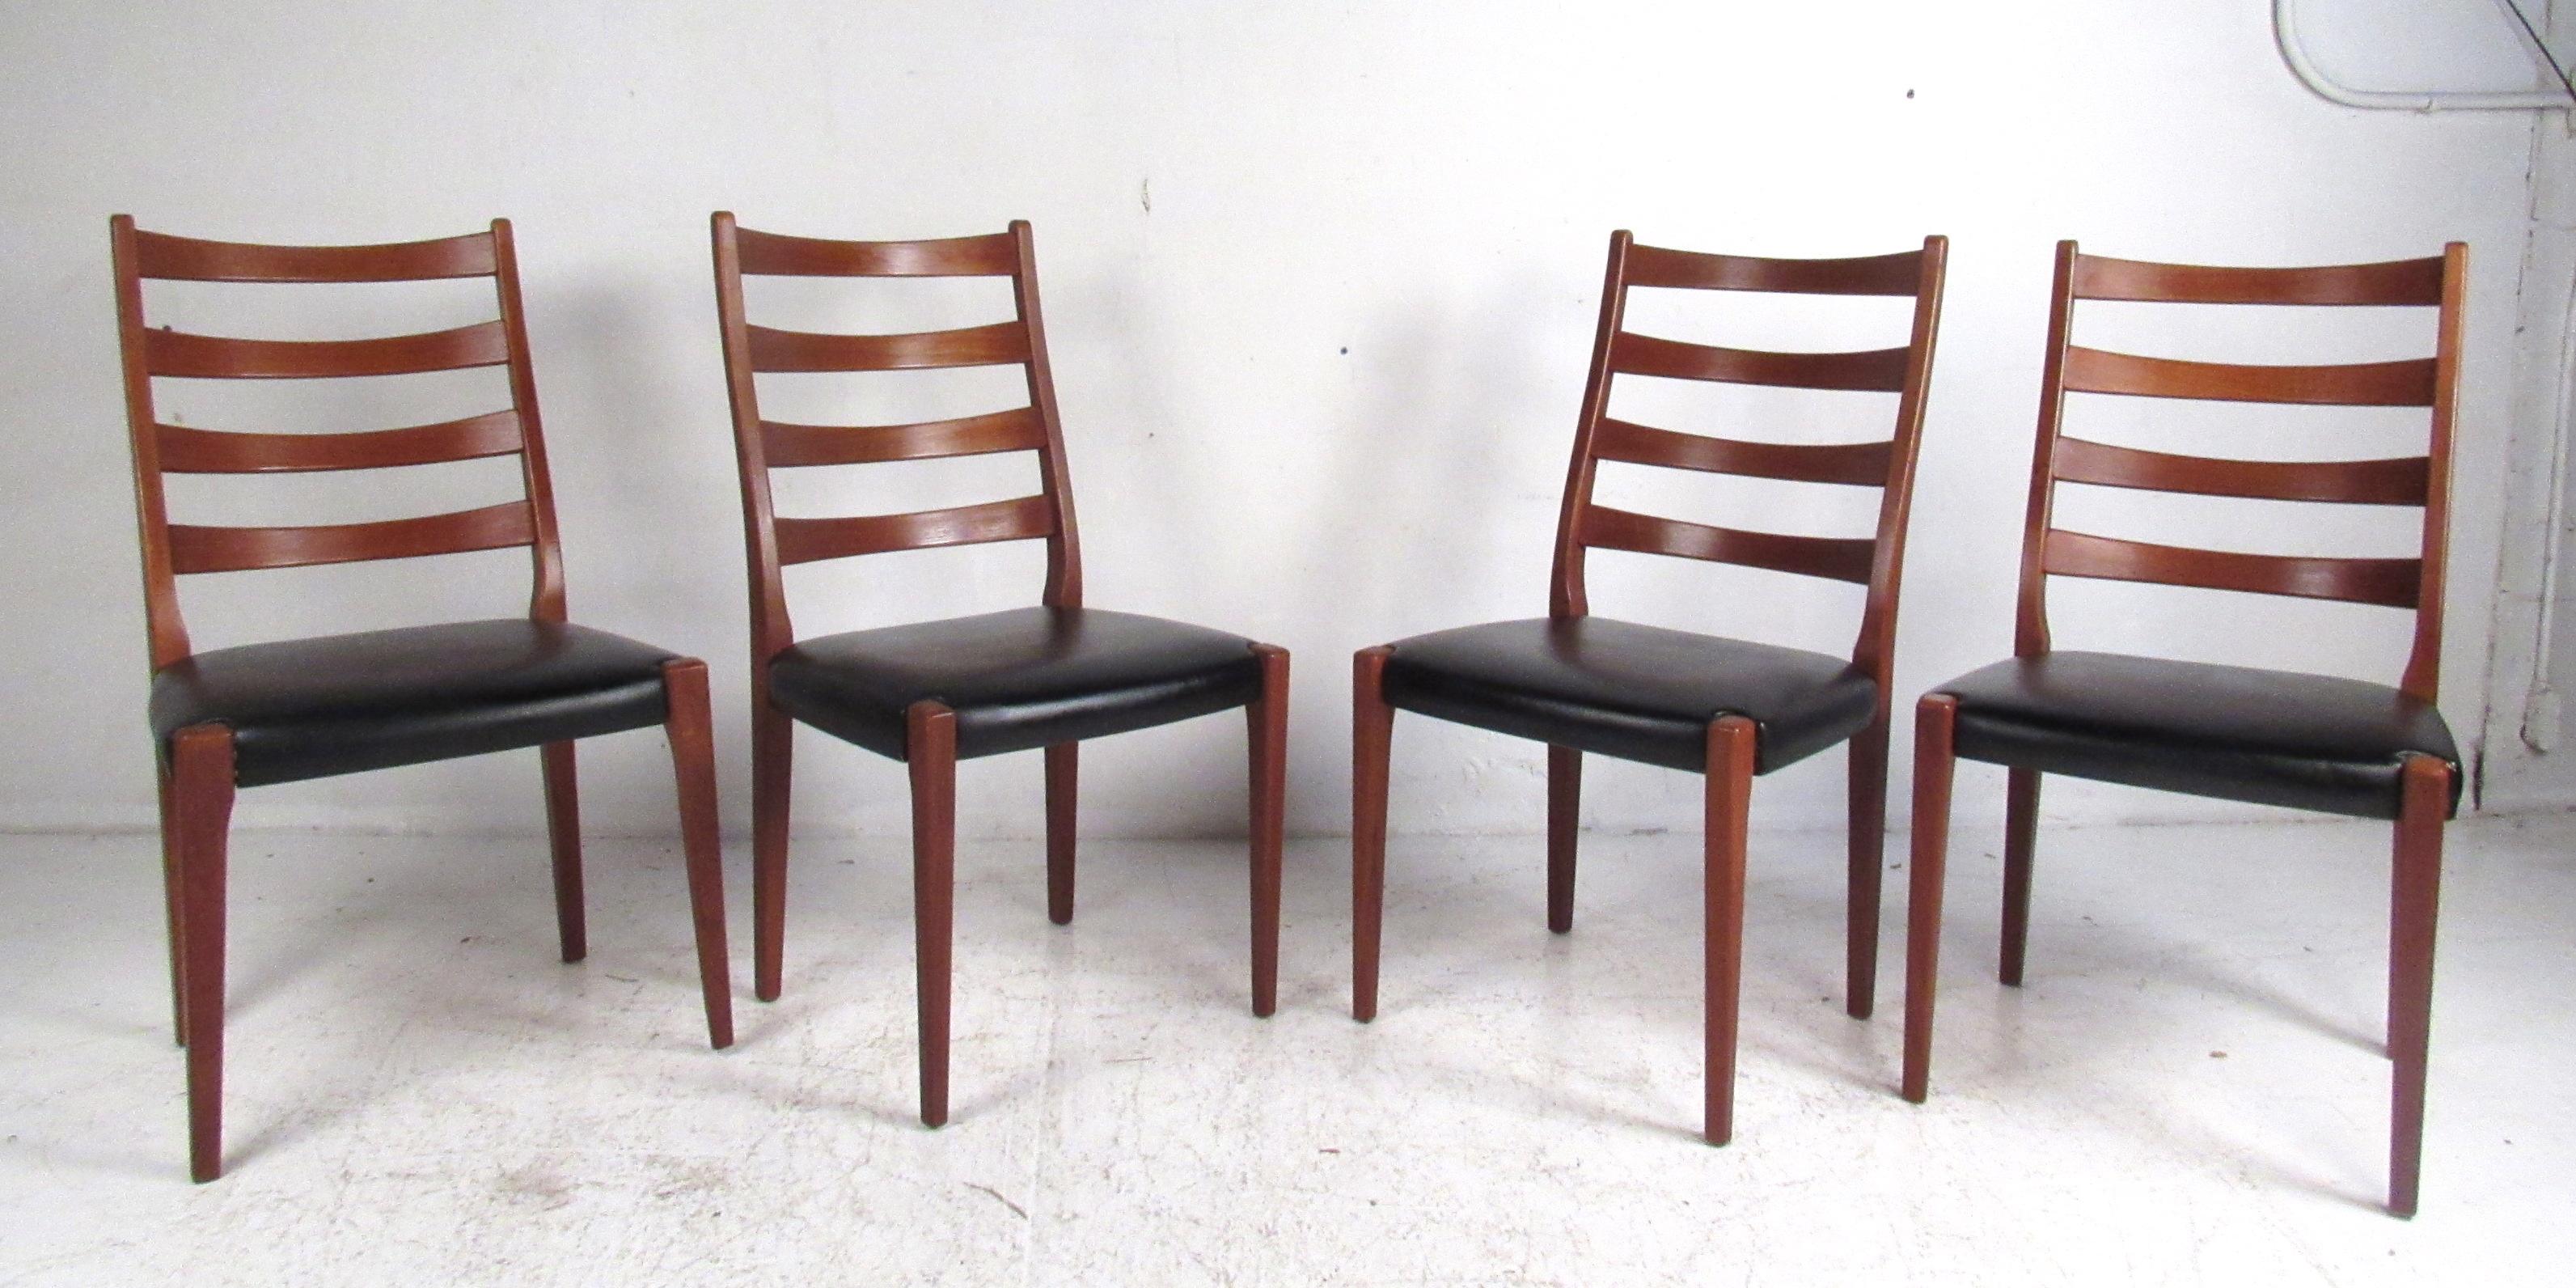 Midcentury Skovby Mobelfabrik Dining Set In Good Condition For Sale In Brooklyn, NY